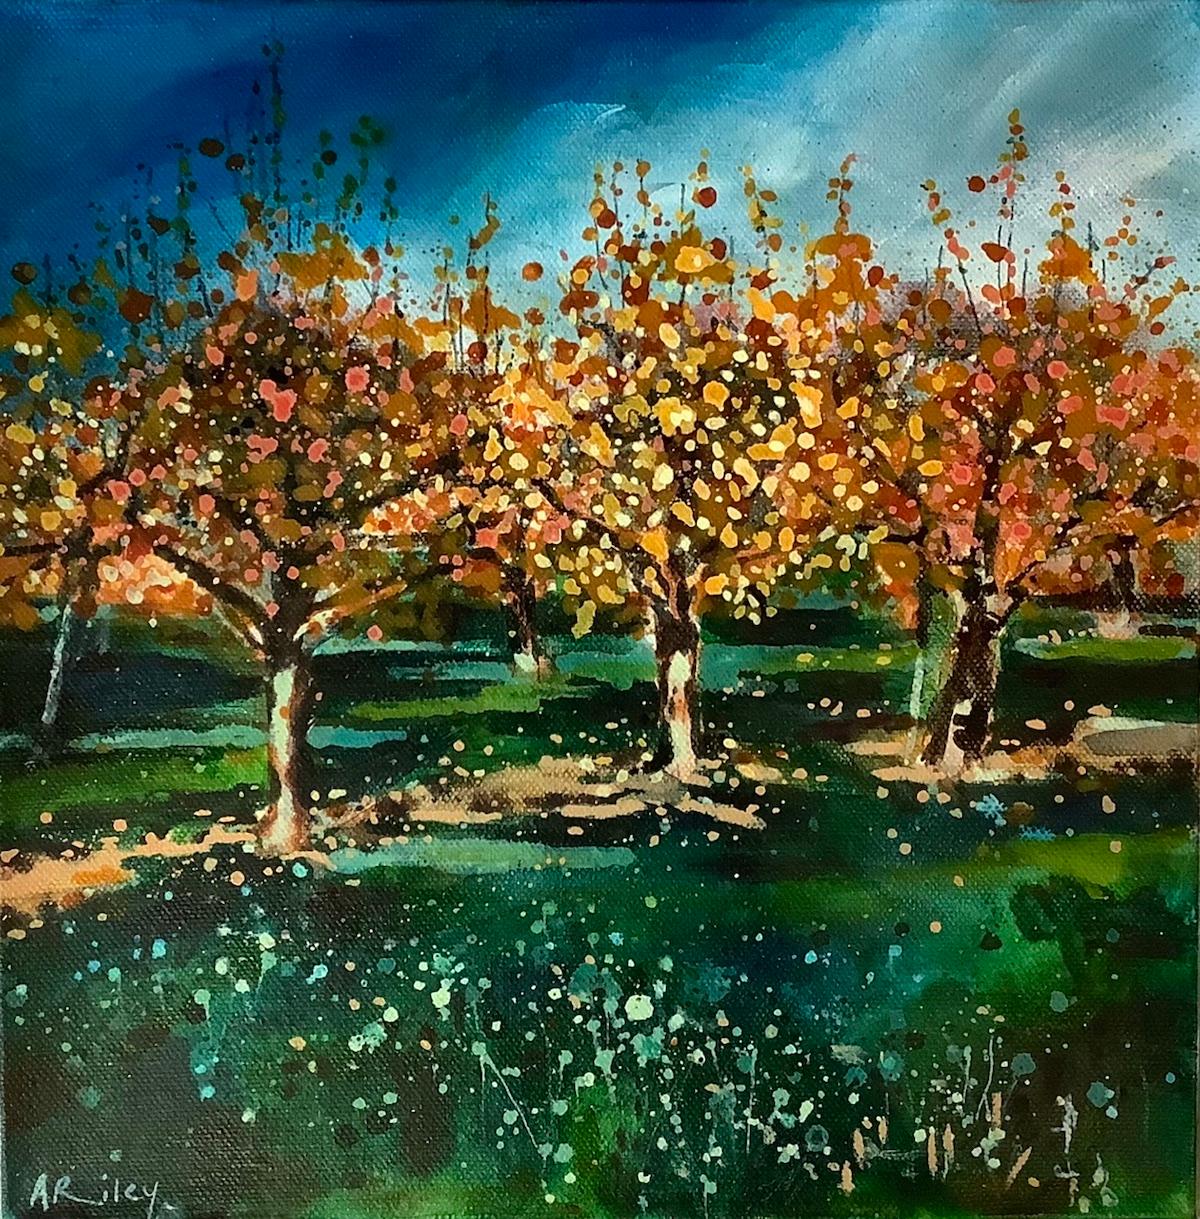 Adele Riley  Landscape Painting - The Old Orchard by Adele Riley, Contemporary art, Original landscape painting 